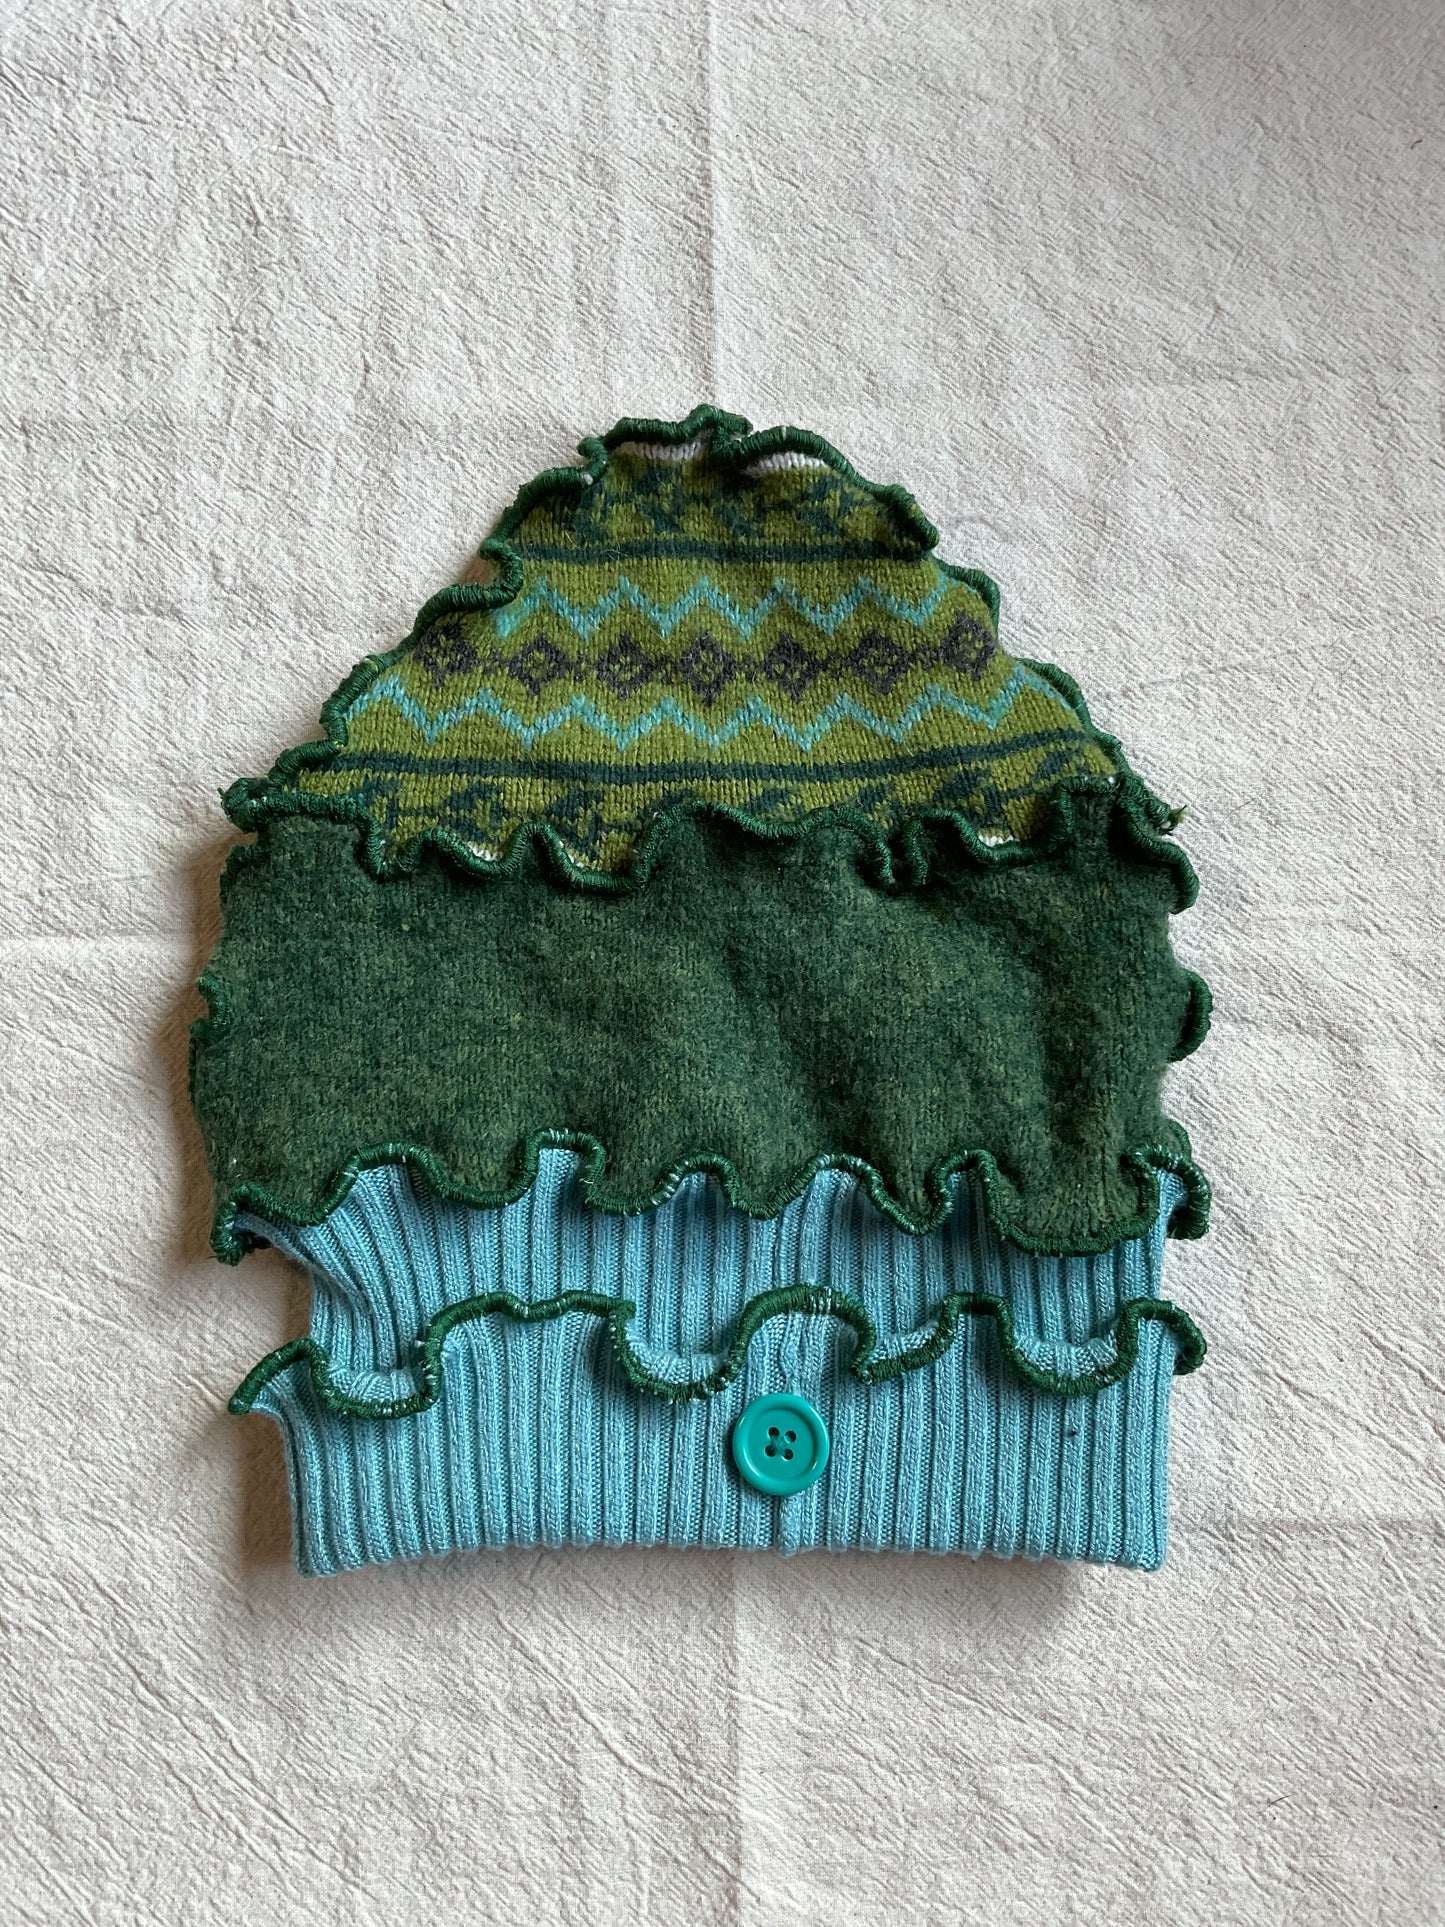 Green & Teal Cloche Style Upcycled Beanie